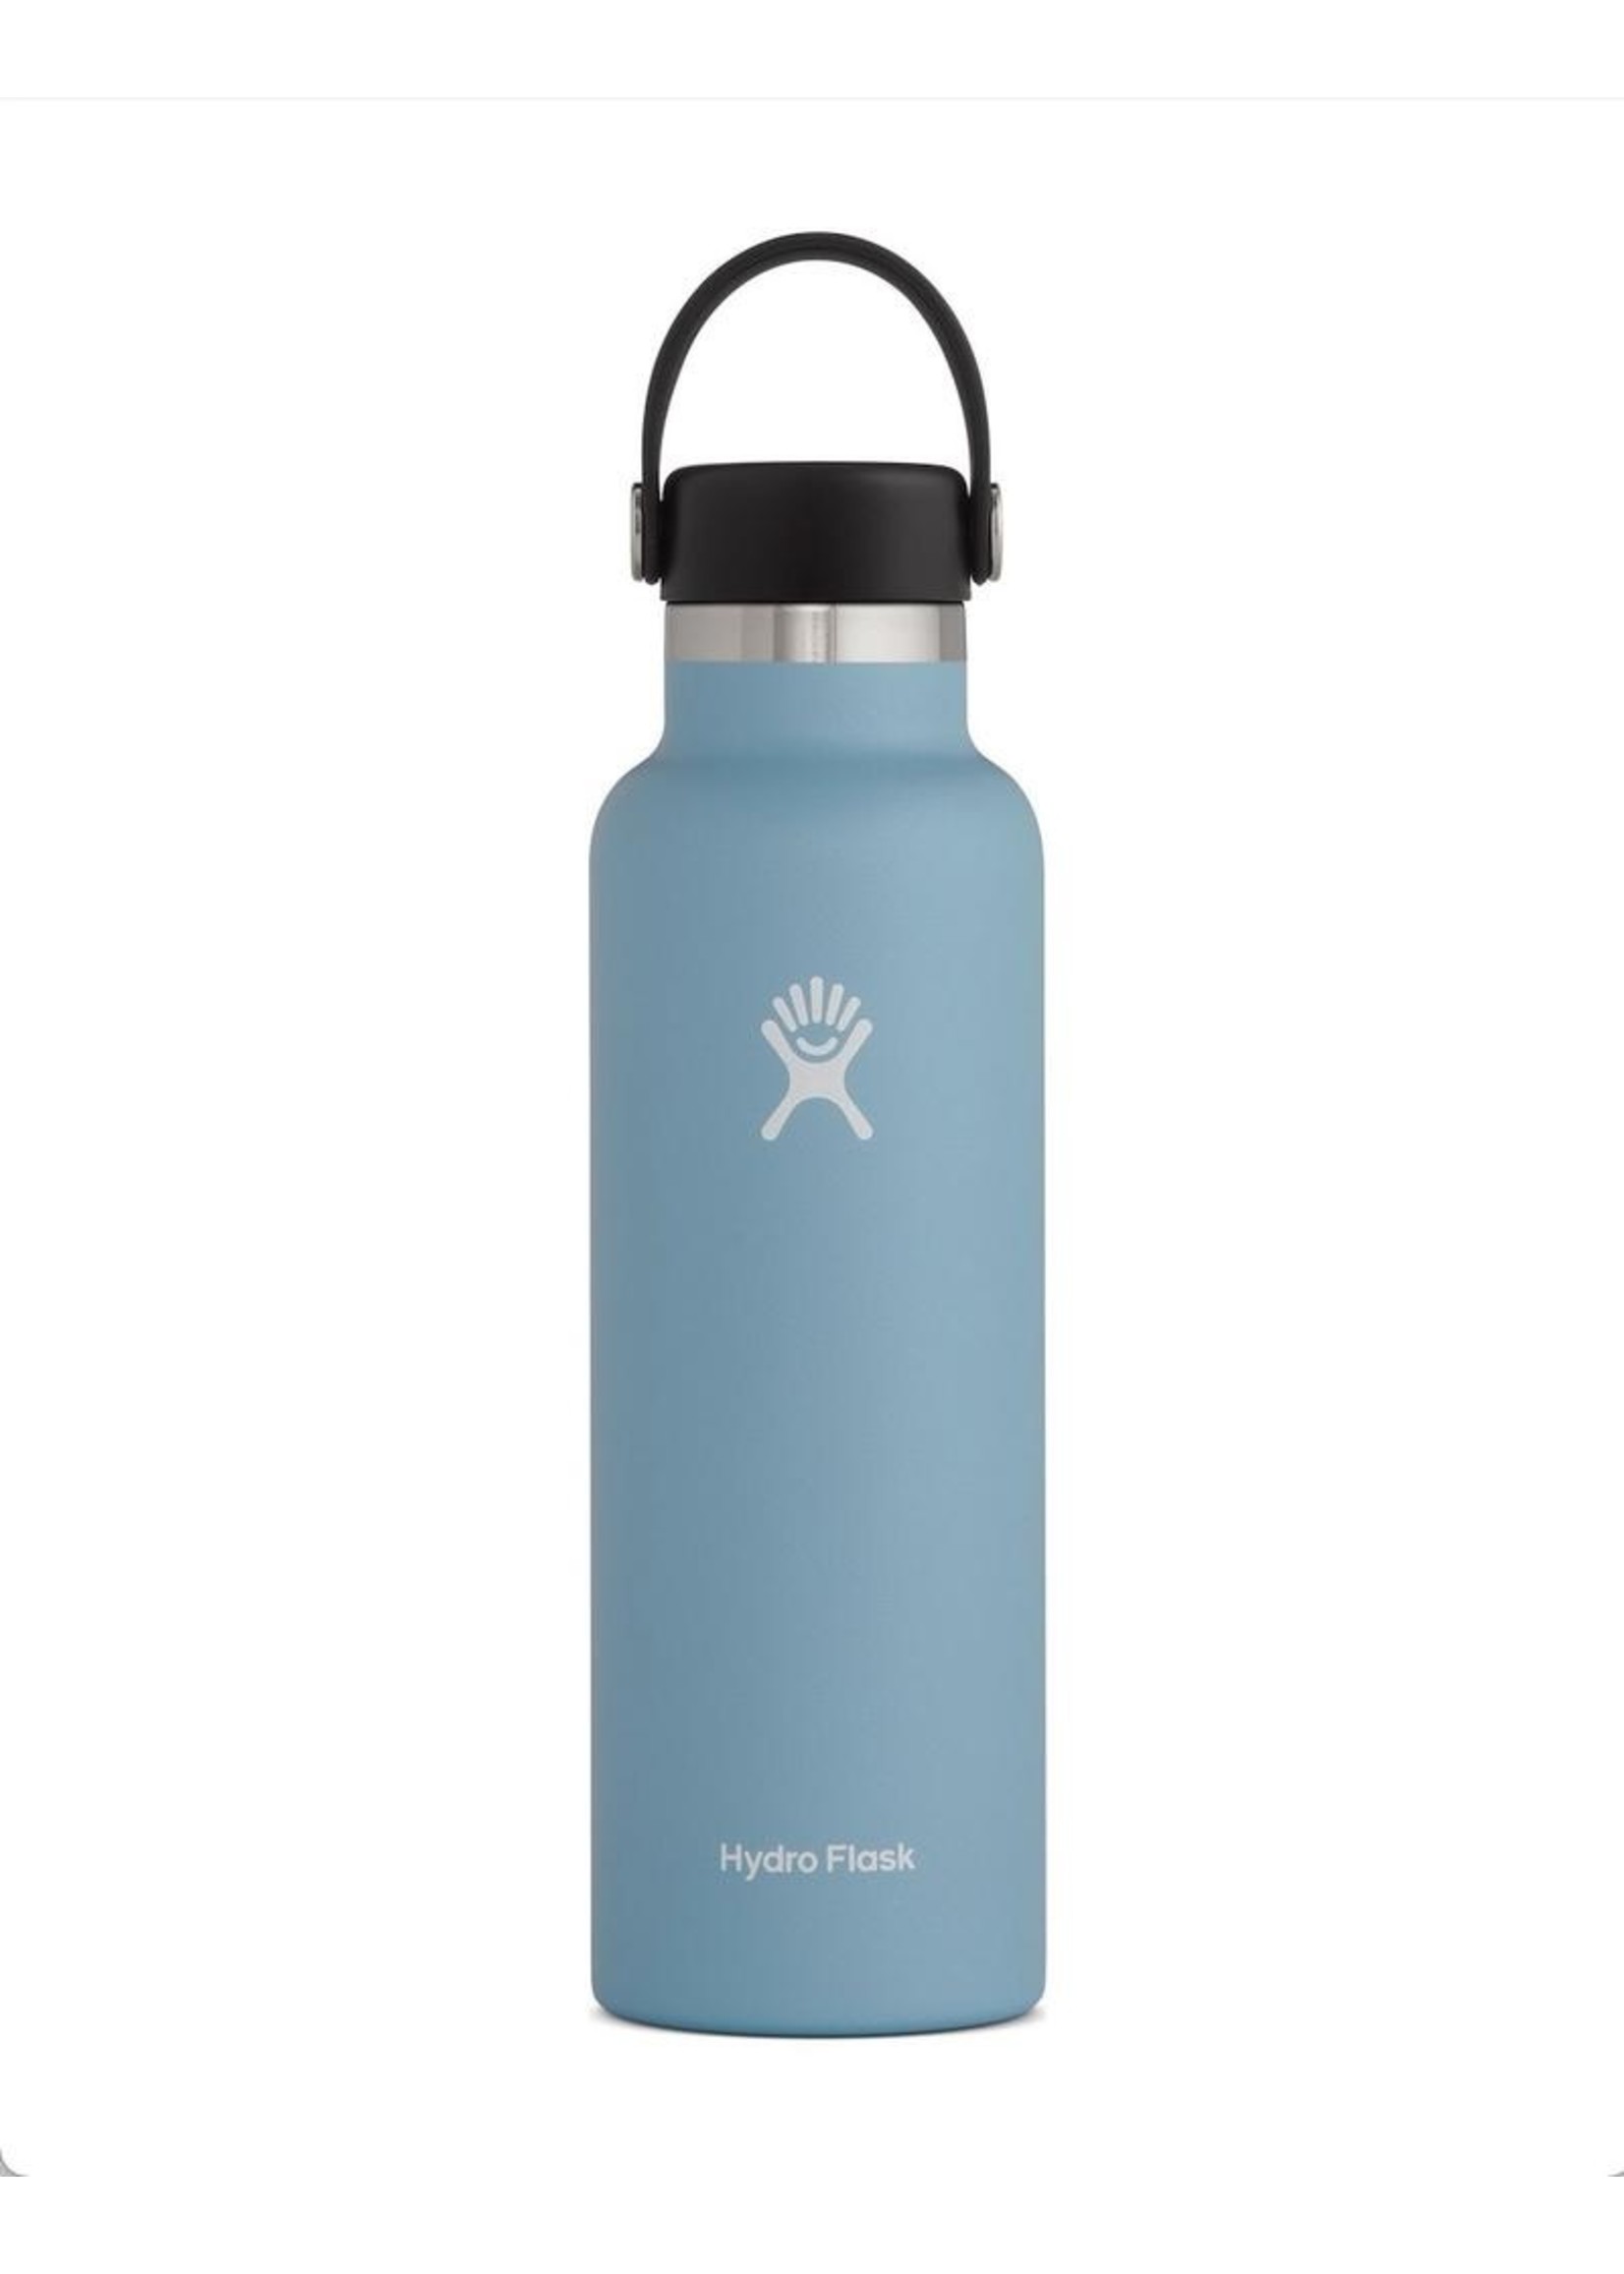 Hydro Flask Hydro Flask, 21 oz Standard Mouth Flex Cap Insulated Stainless Steel Bottle in Rain